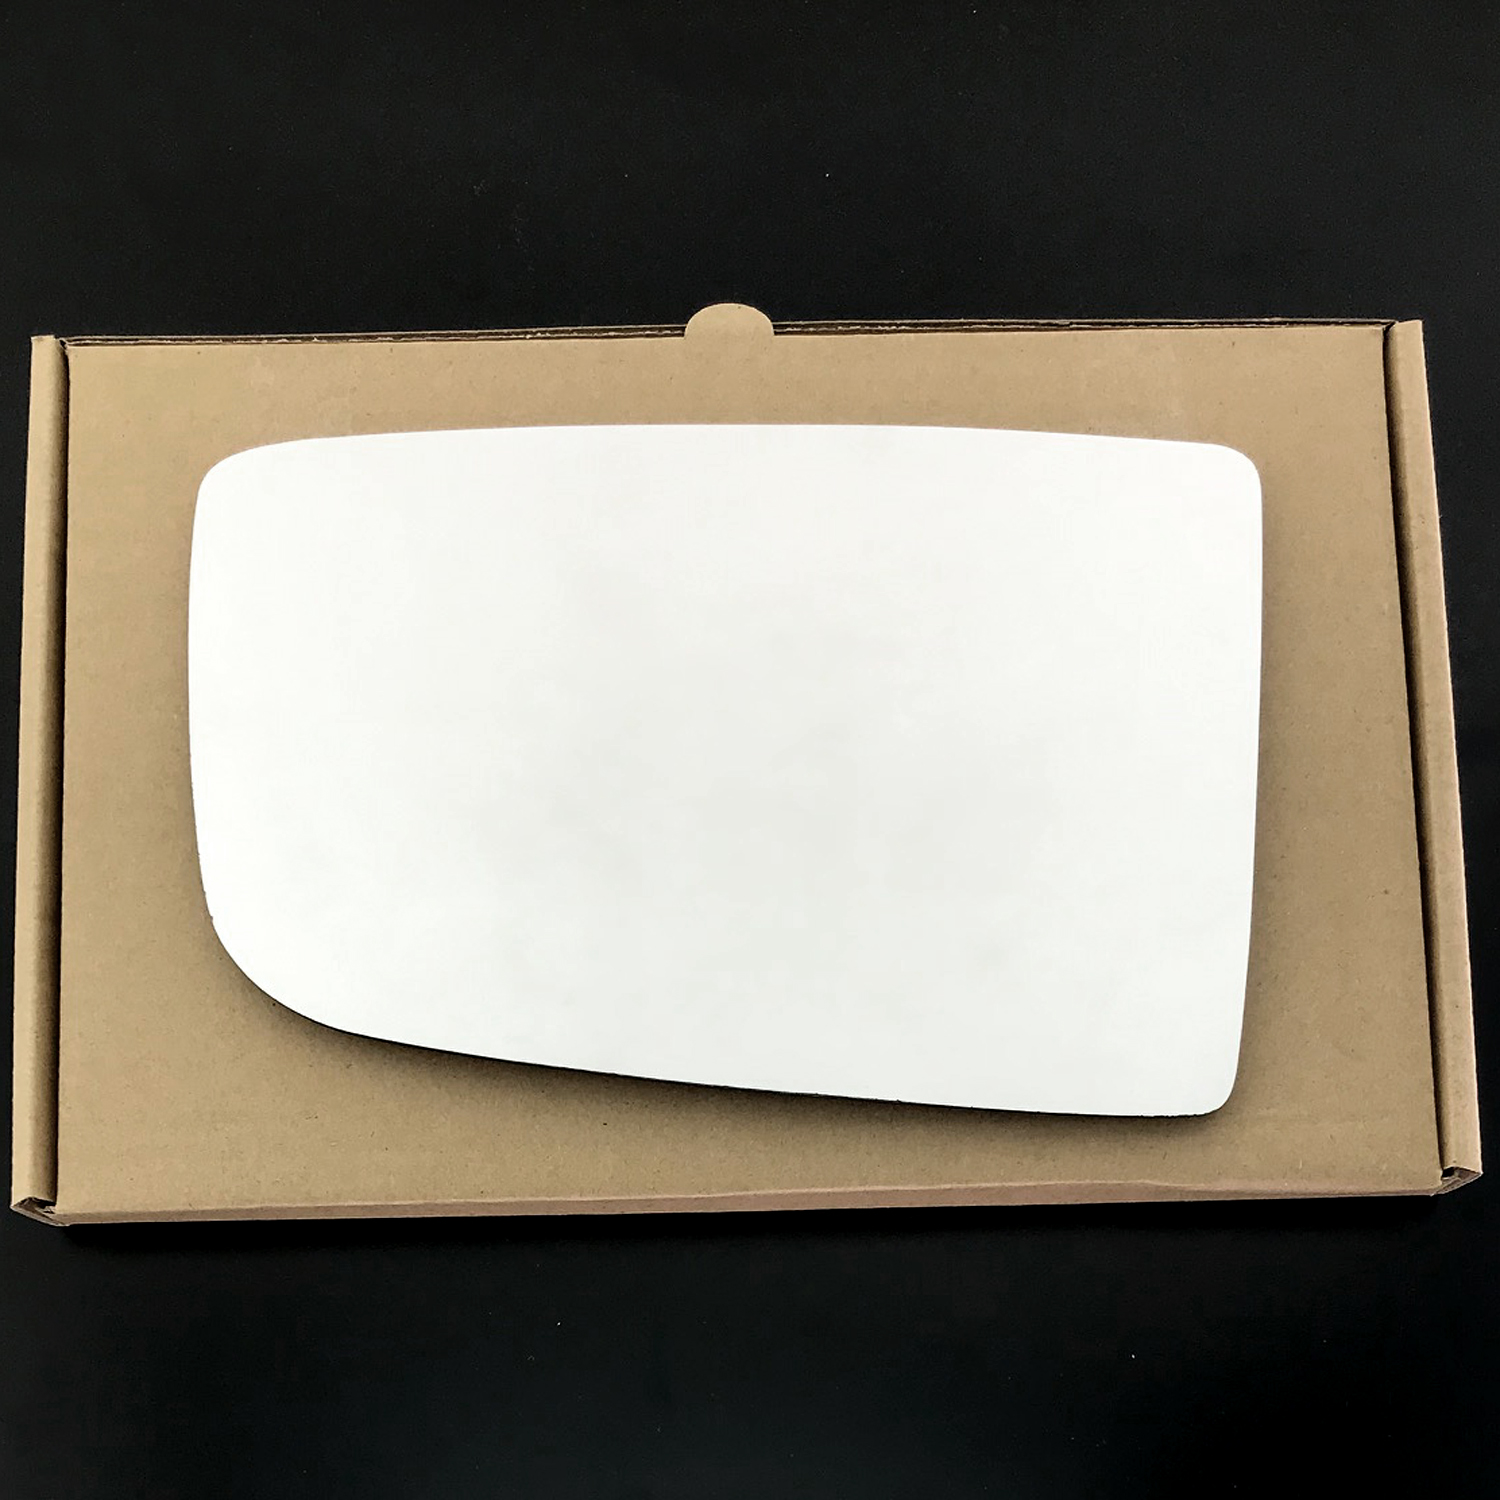 Volkswagen Crafter  Wing Mirror Glass LEFT HAND ( UK Passenger Side ) 2007 to 2010 ( Without Indicator ) – Convex Wing Mirror